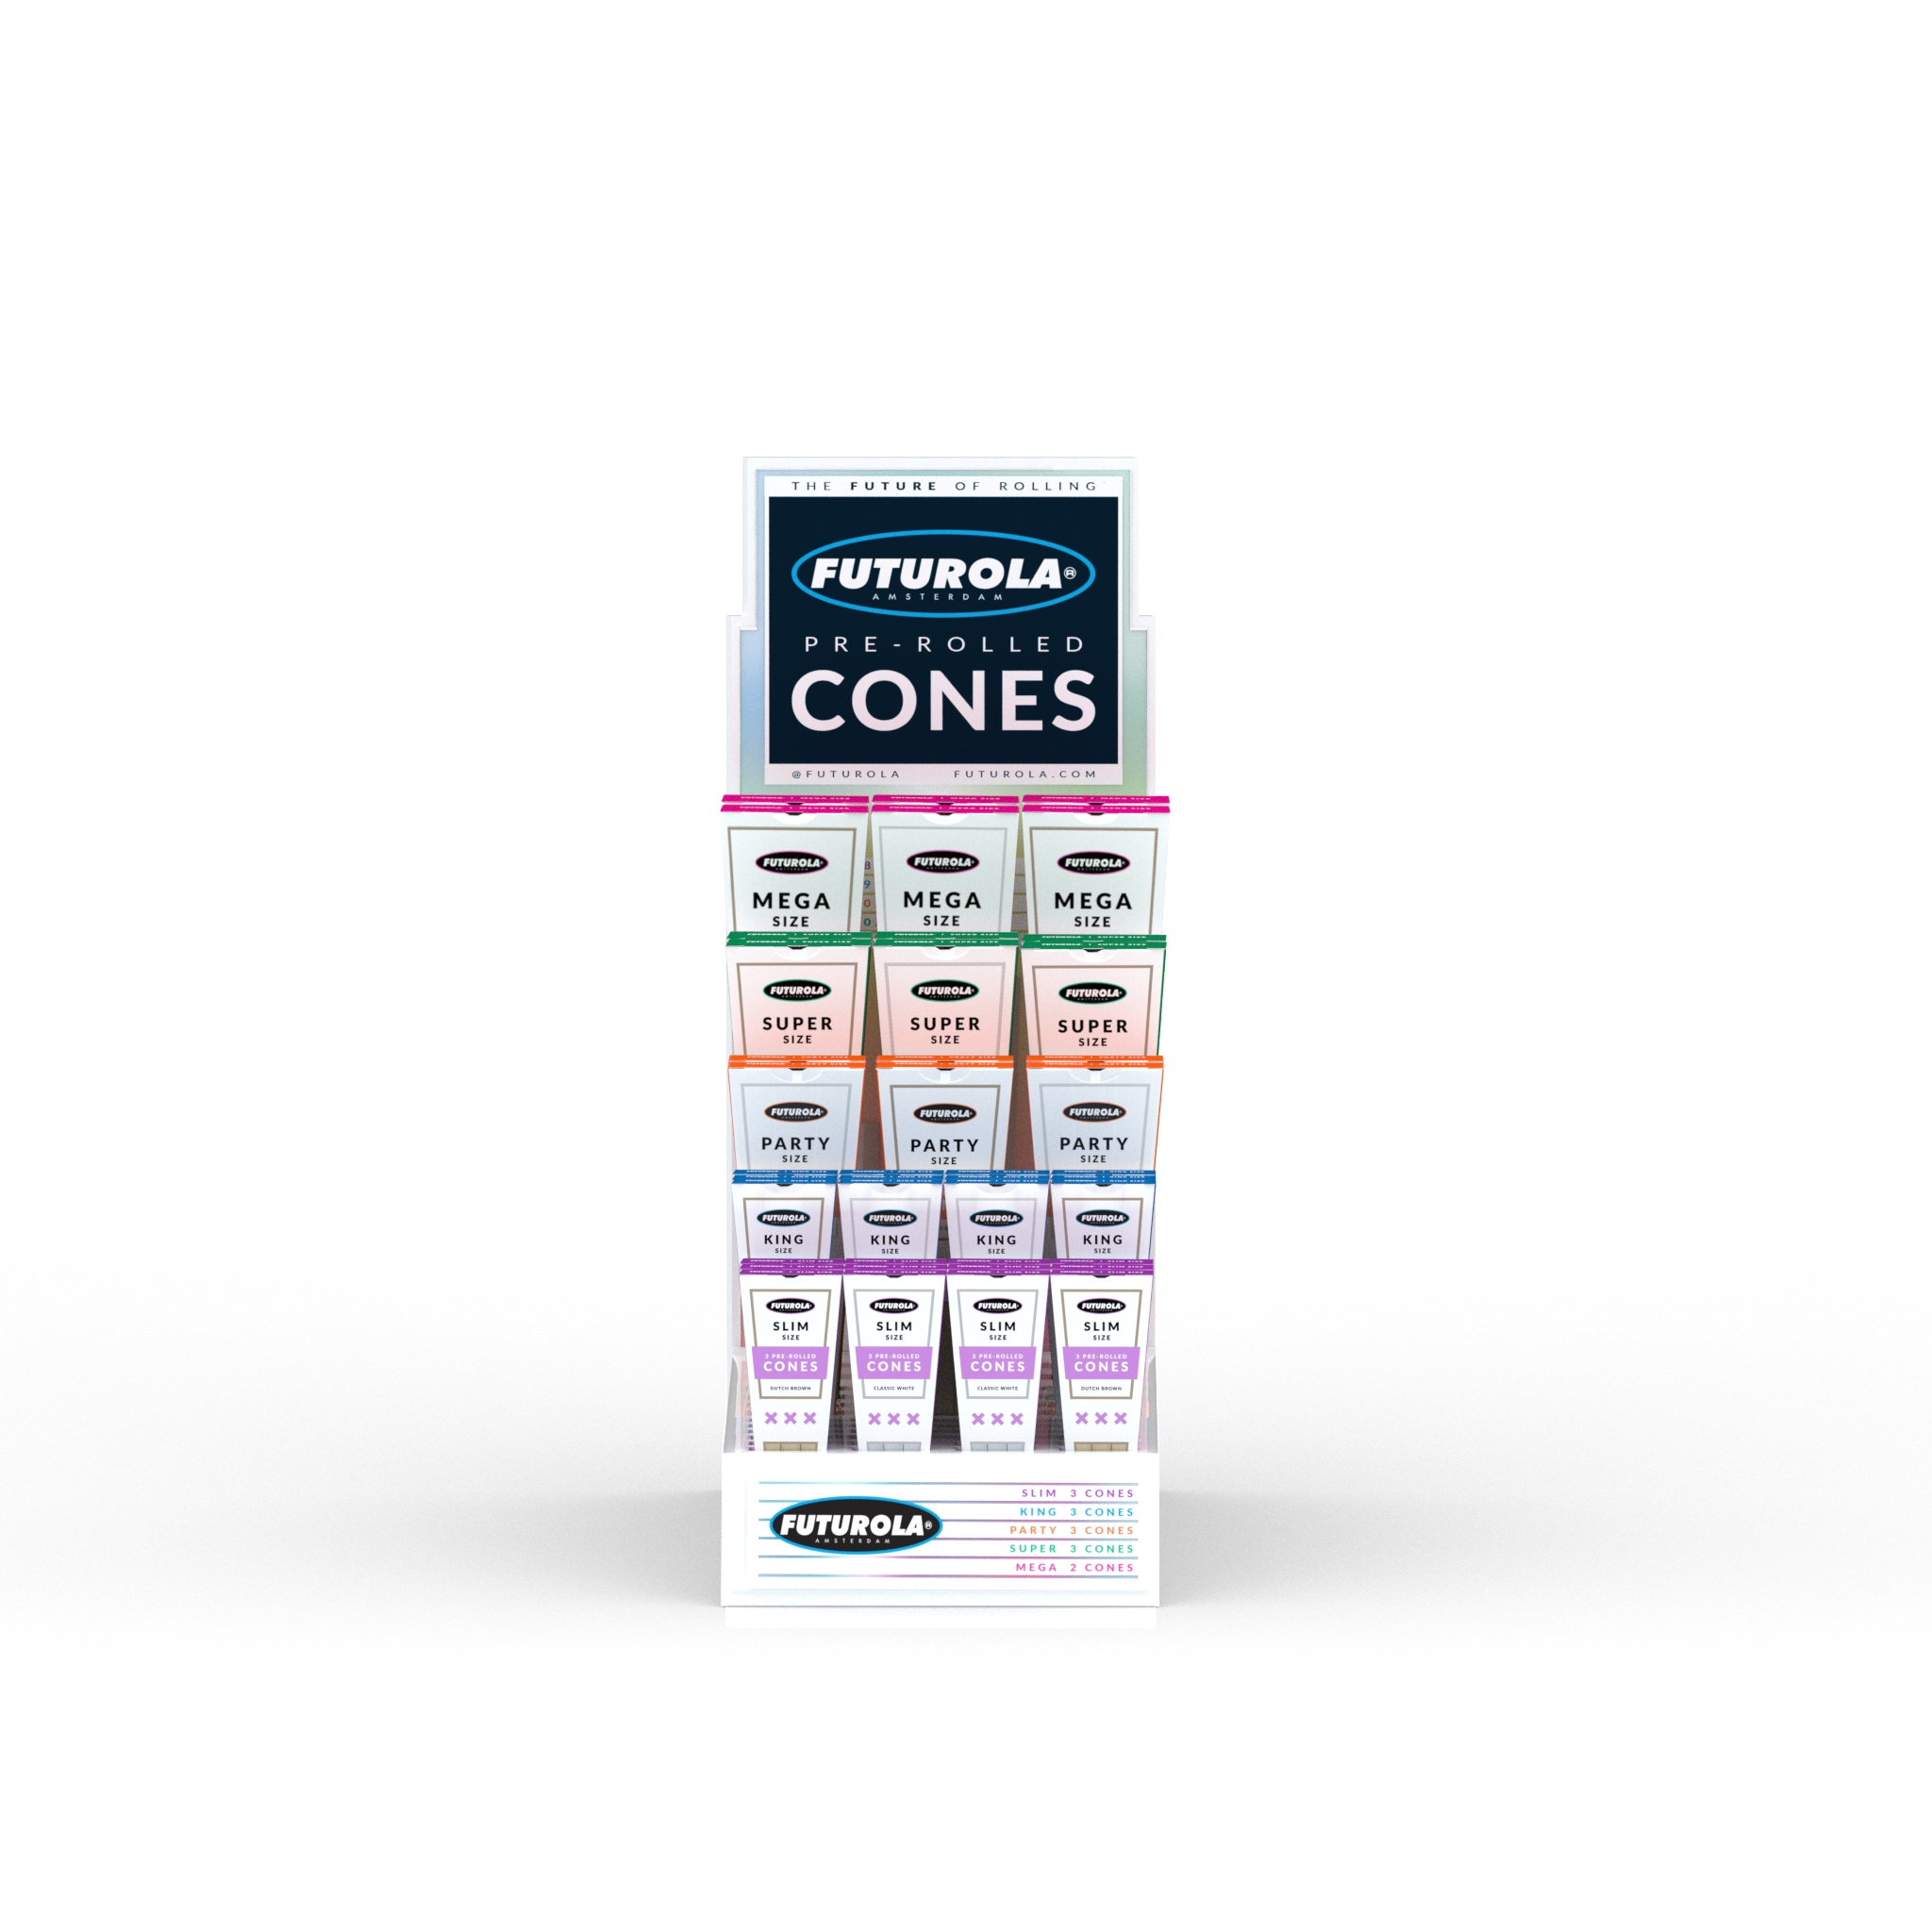 CLASSIC PRE-ROLLED CONES DISPLAY REFILL [W]